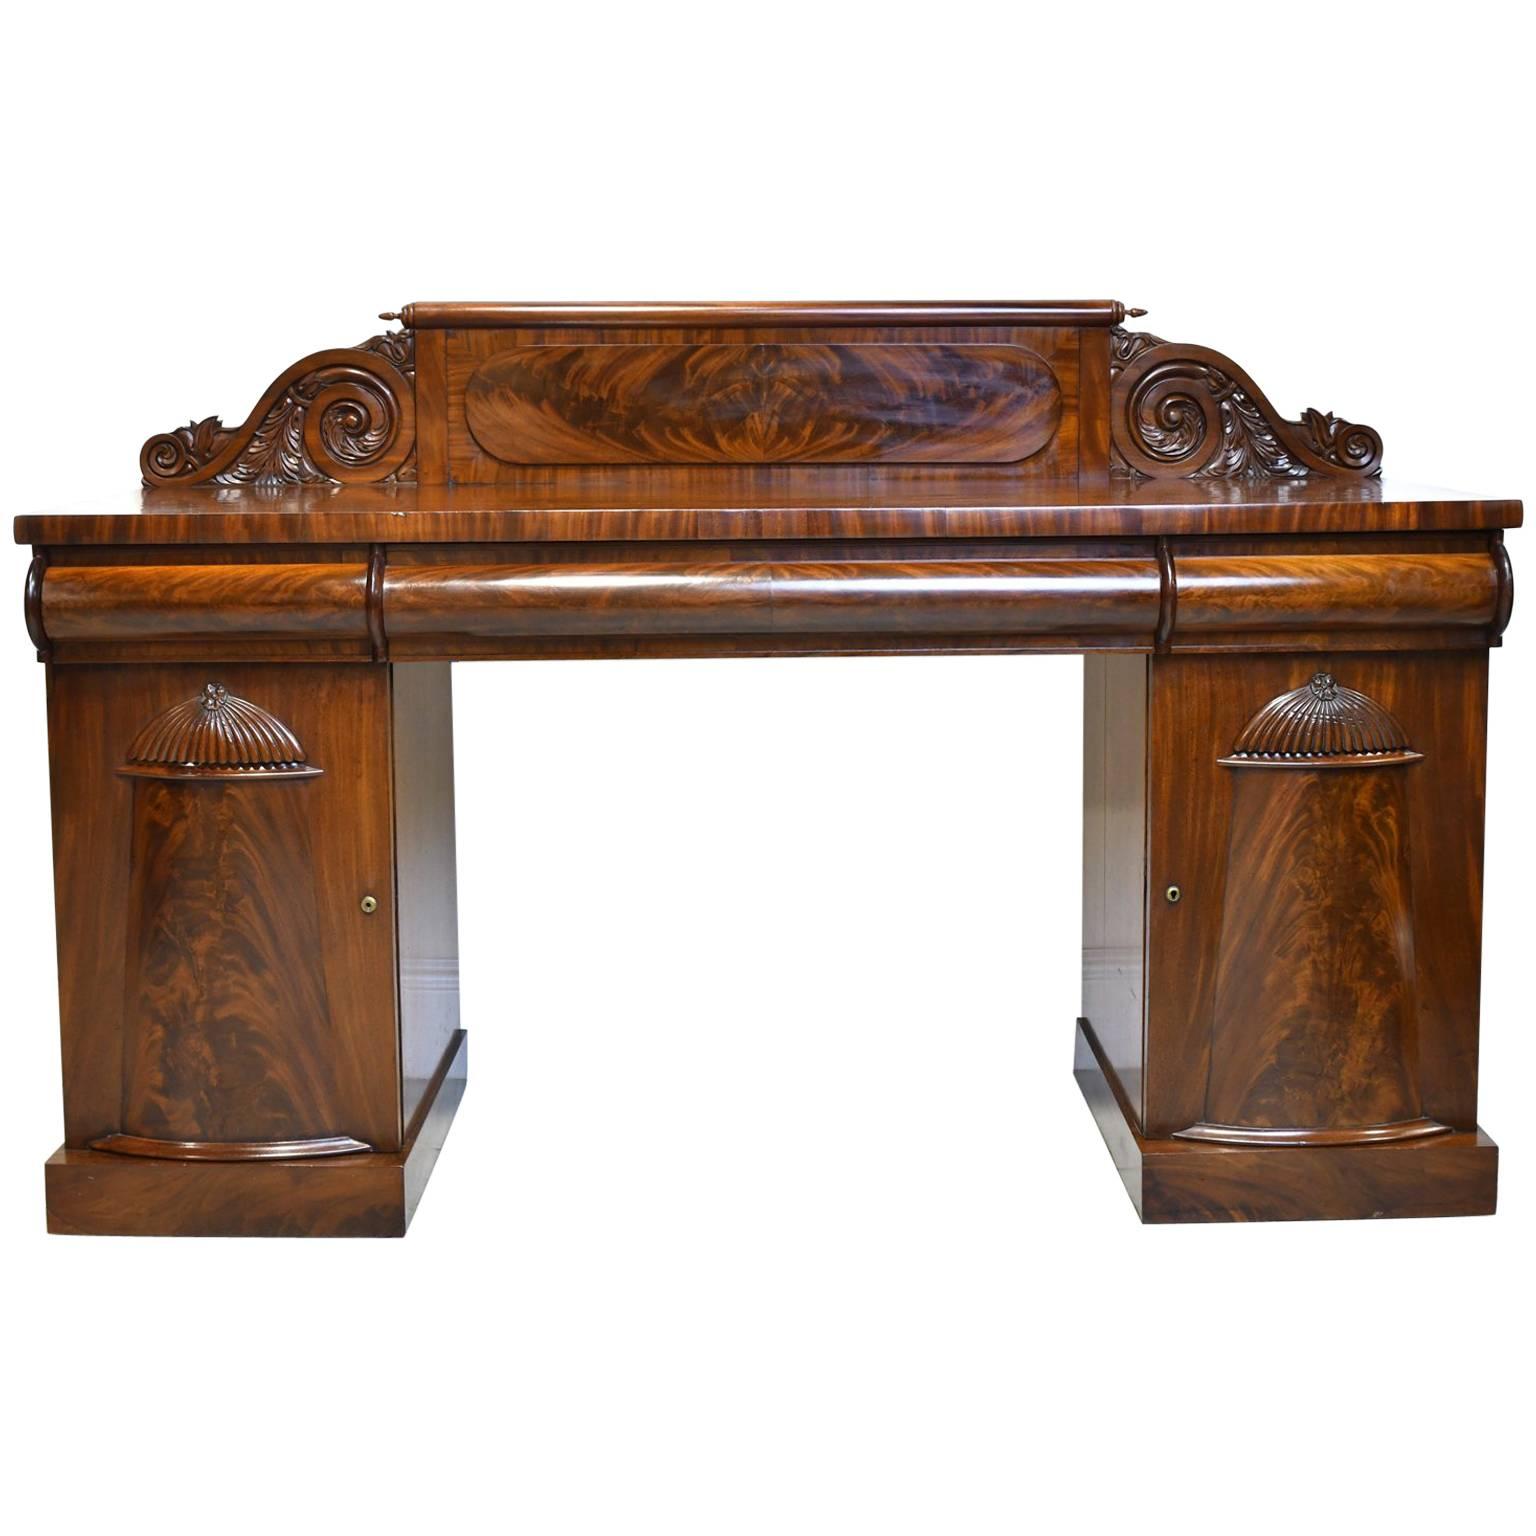 English Regency Pedestal Sideboard in Mahogany with Carved Backboard, circa 1830